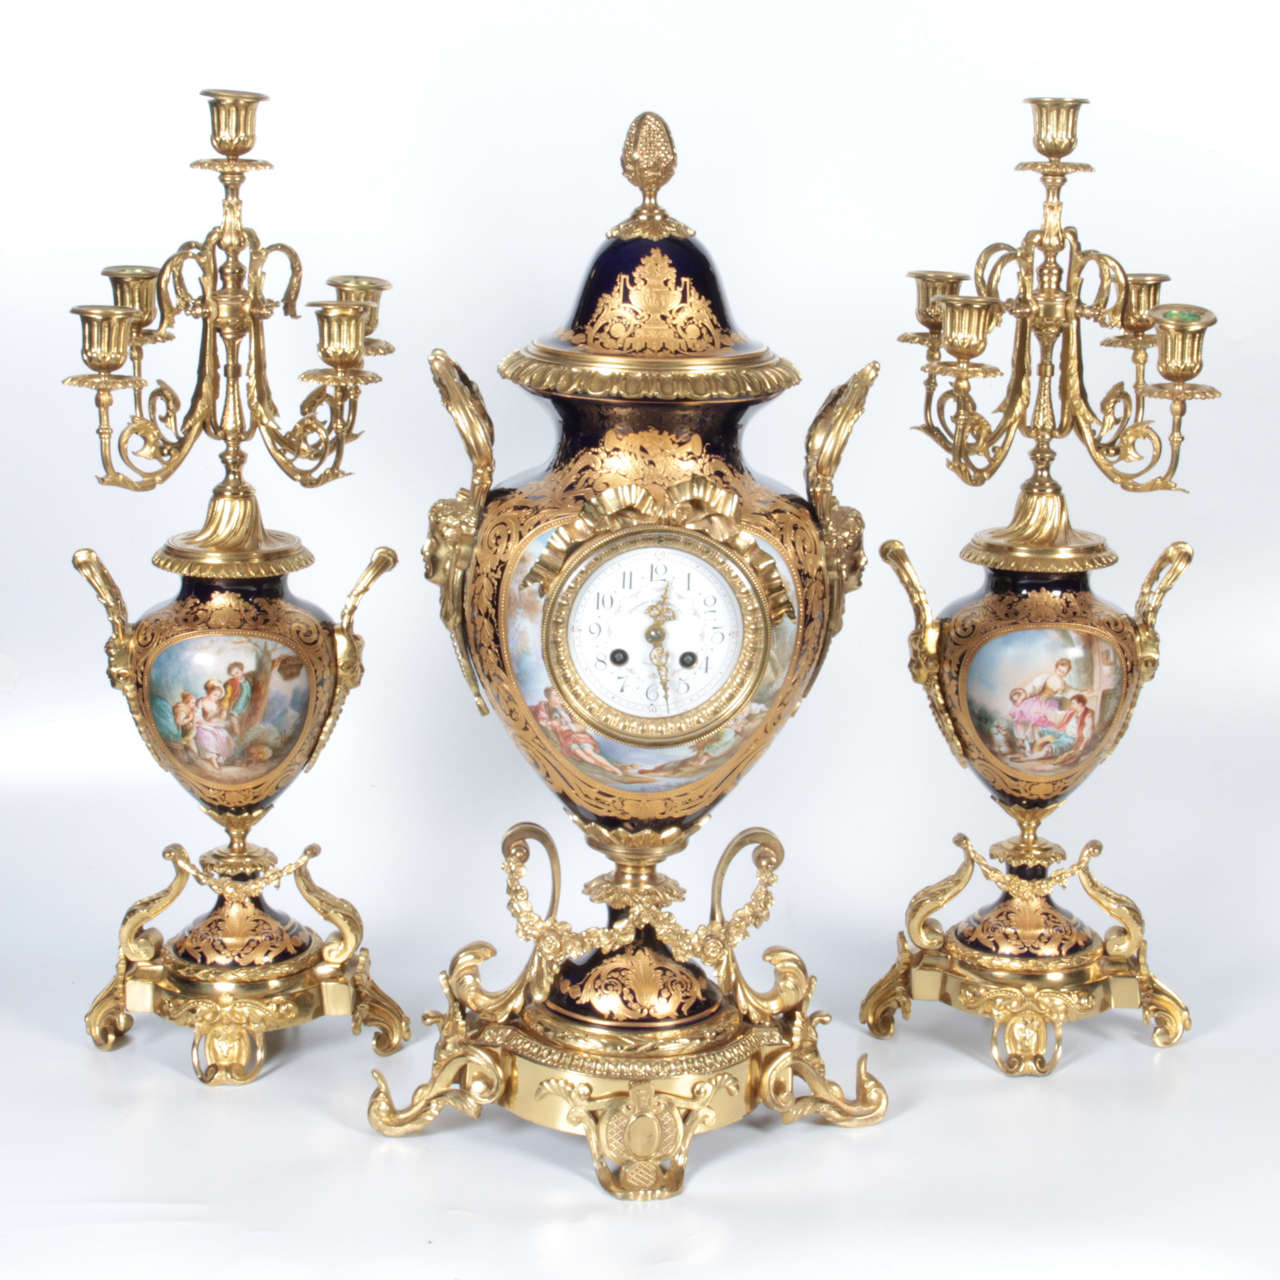 A beautiful antique French ormolu-mounted royal cobalt blue sevres porcelain three-piece clock garniture accompanied by the original pair of five-light candelabrum, 19th century. There are pastoral scenes in the vein of Boucher decorating the